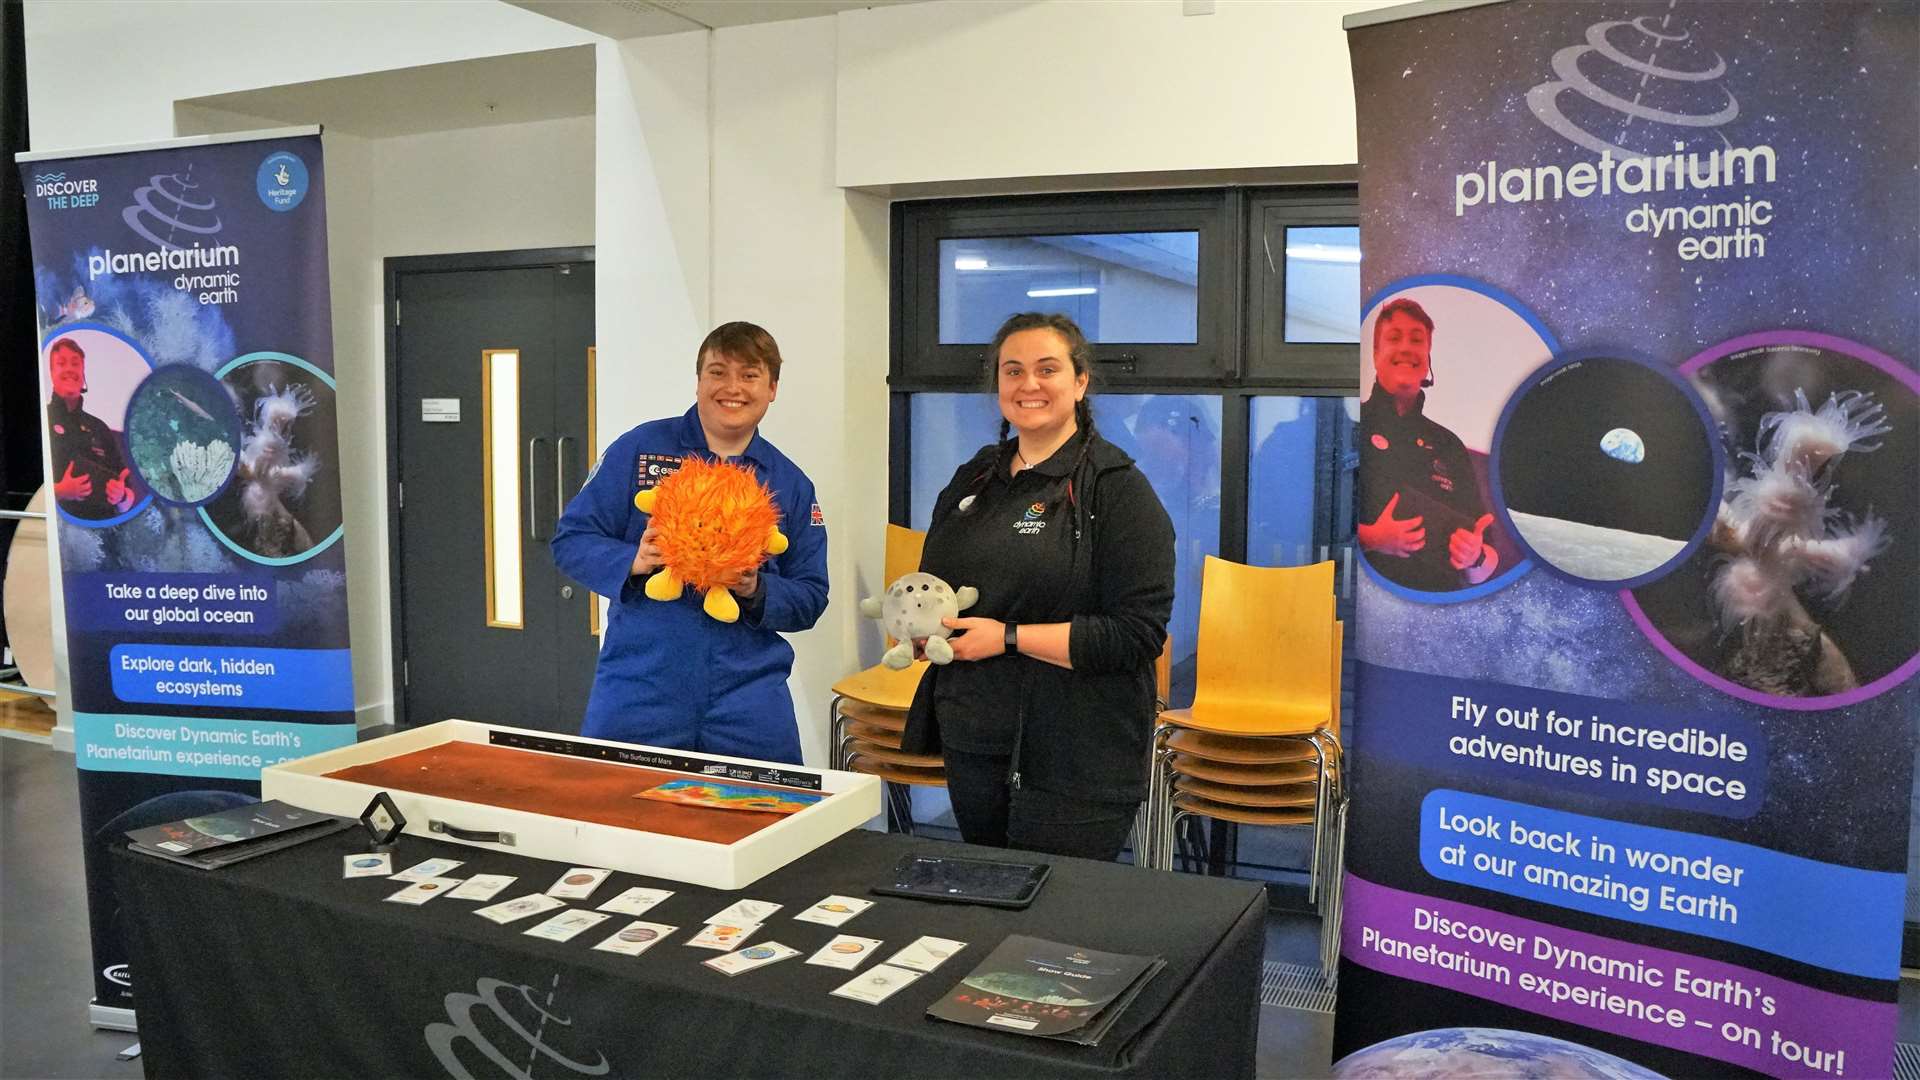 James Fawcett, left, and Toni Newell from Dynamic Earth talked about the planetarium space shows they host. Picture: DGS